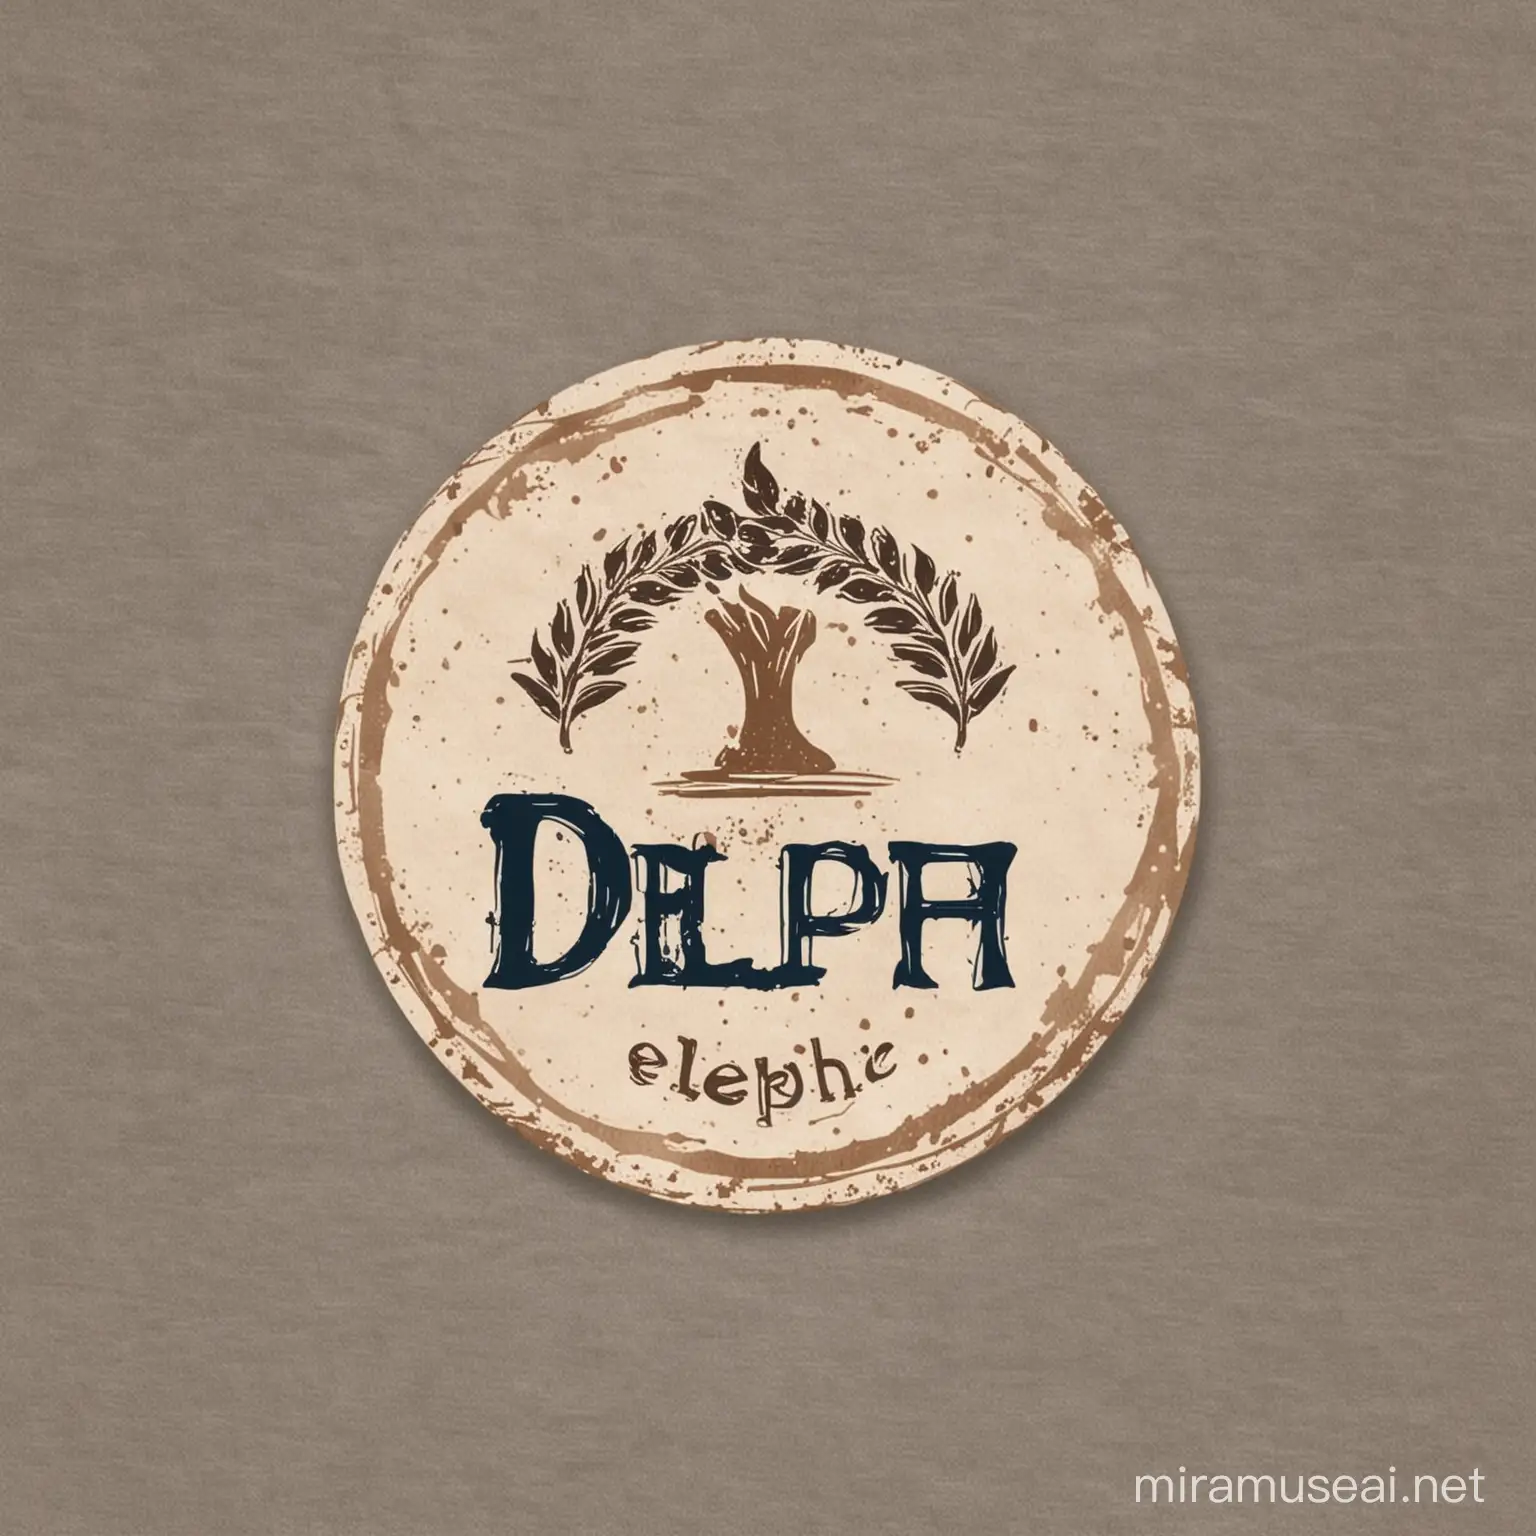 DELPHI Greek Restaurant Logo Deliciously Authentic Dining Experience